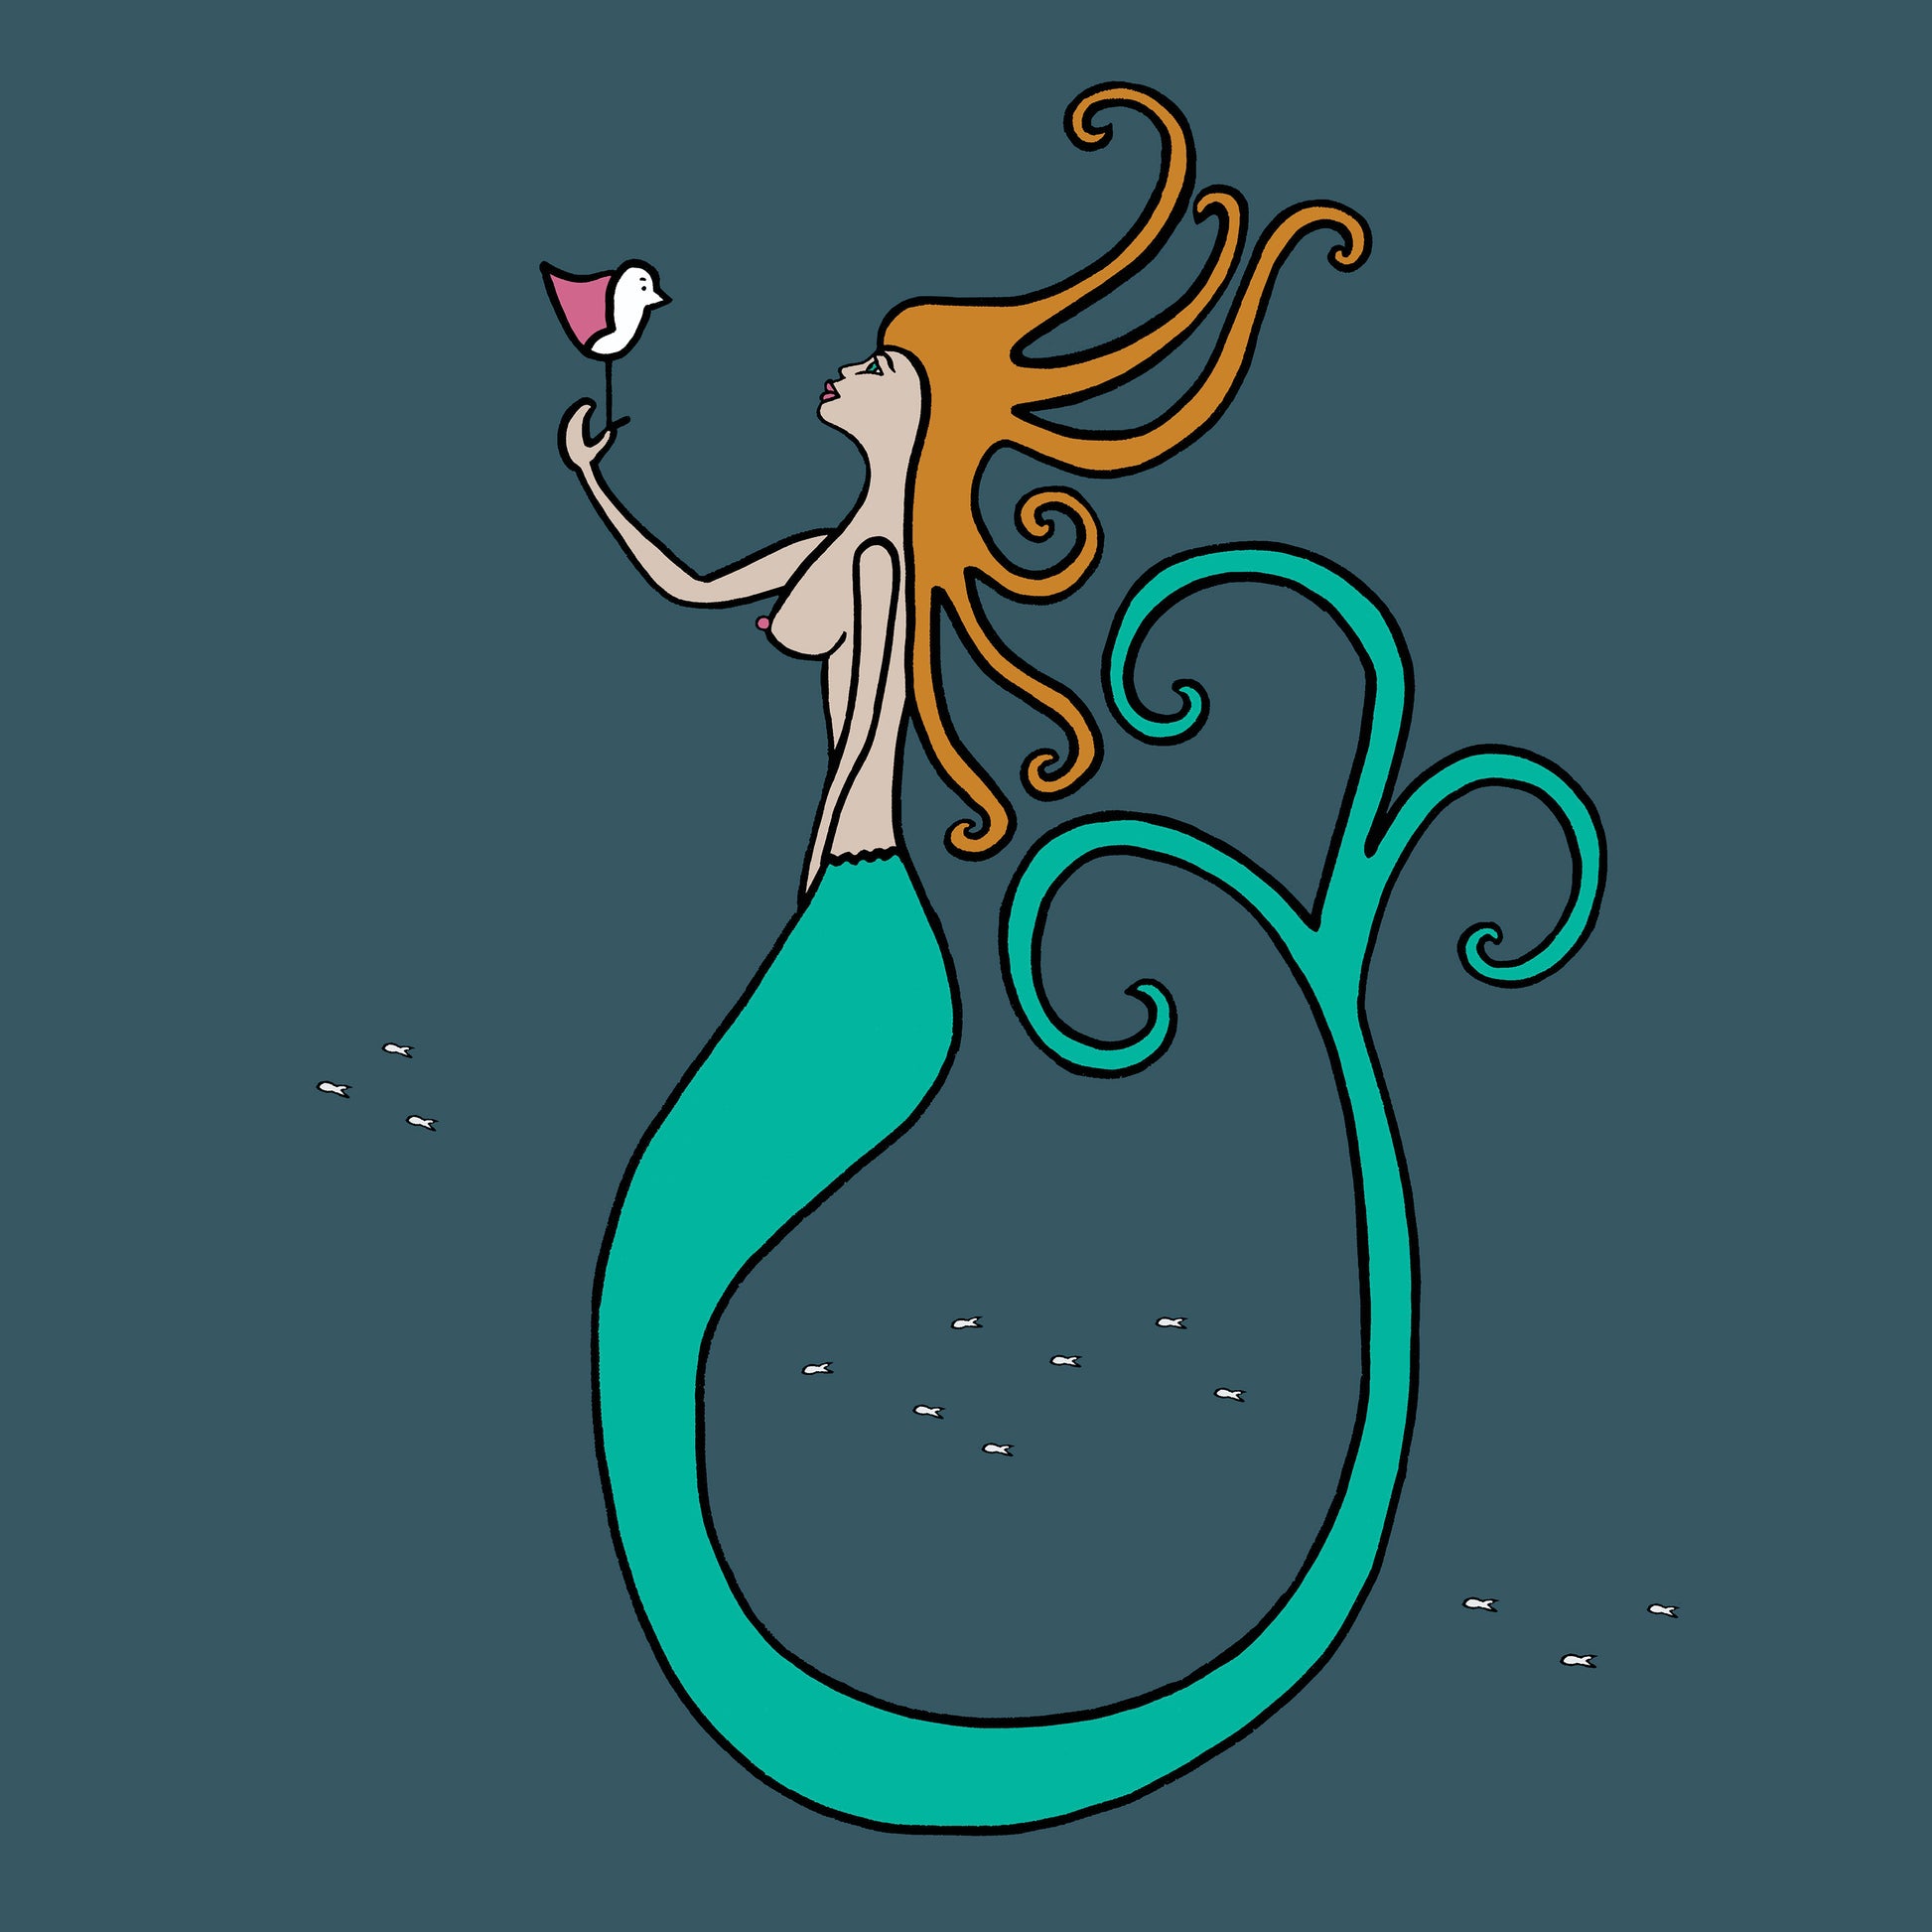 A mermaid with ginger hair and a long green tail is underwater surrounded by small little fishes. The background is teal and the mermaid is holding a pink winged seagull where they are looking at each other. The print is called mermaid kisses.